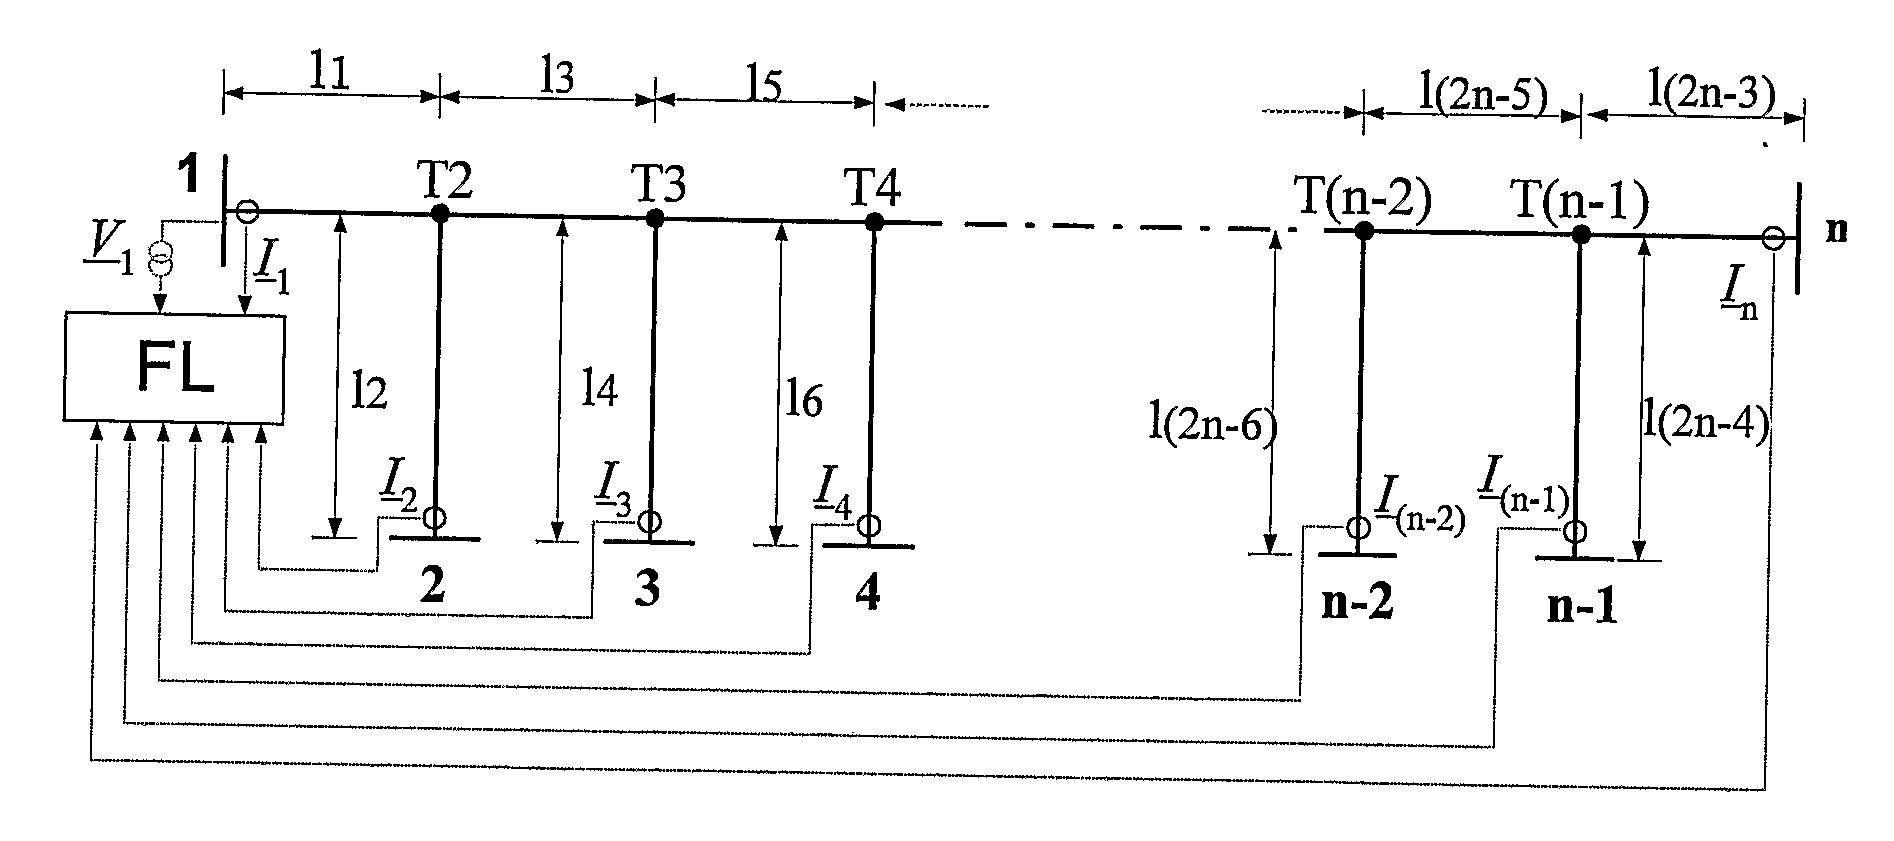 Method for fault location in electric power lines